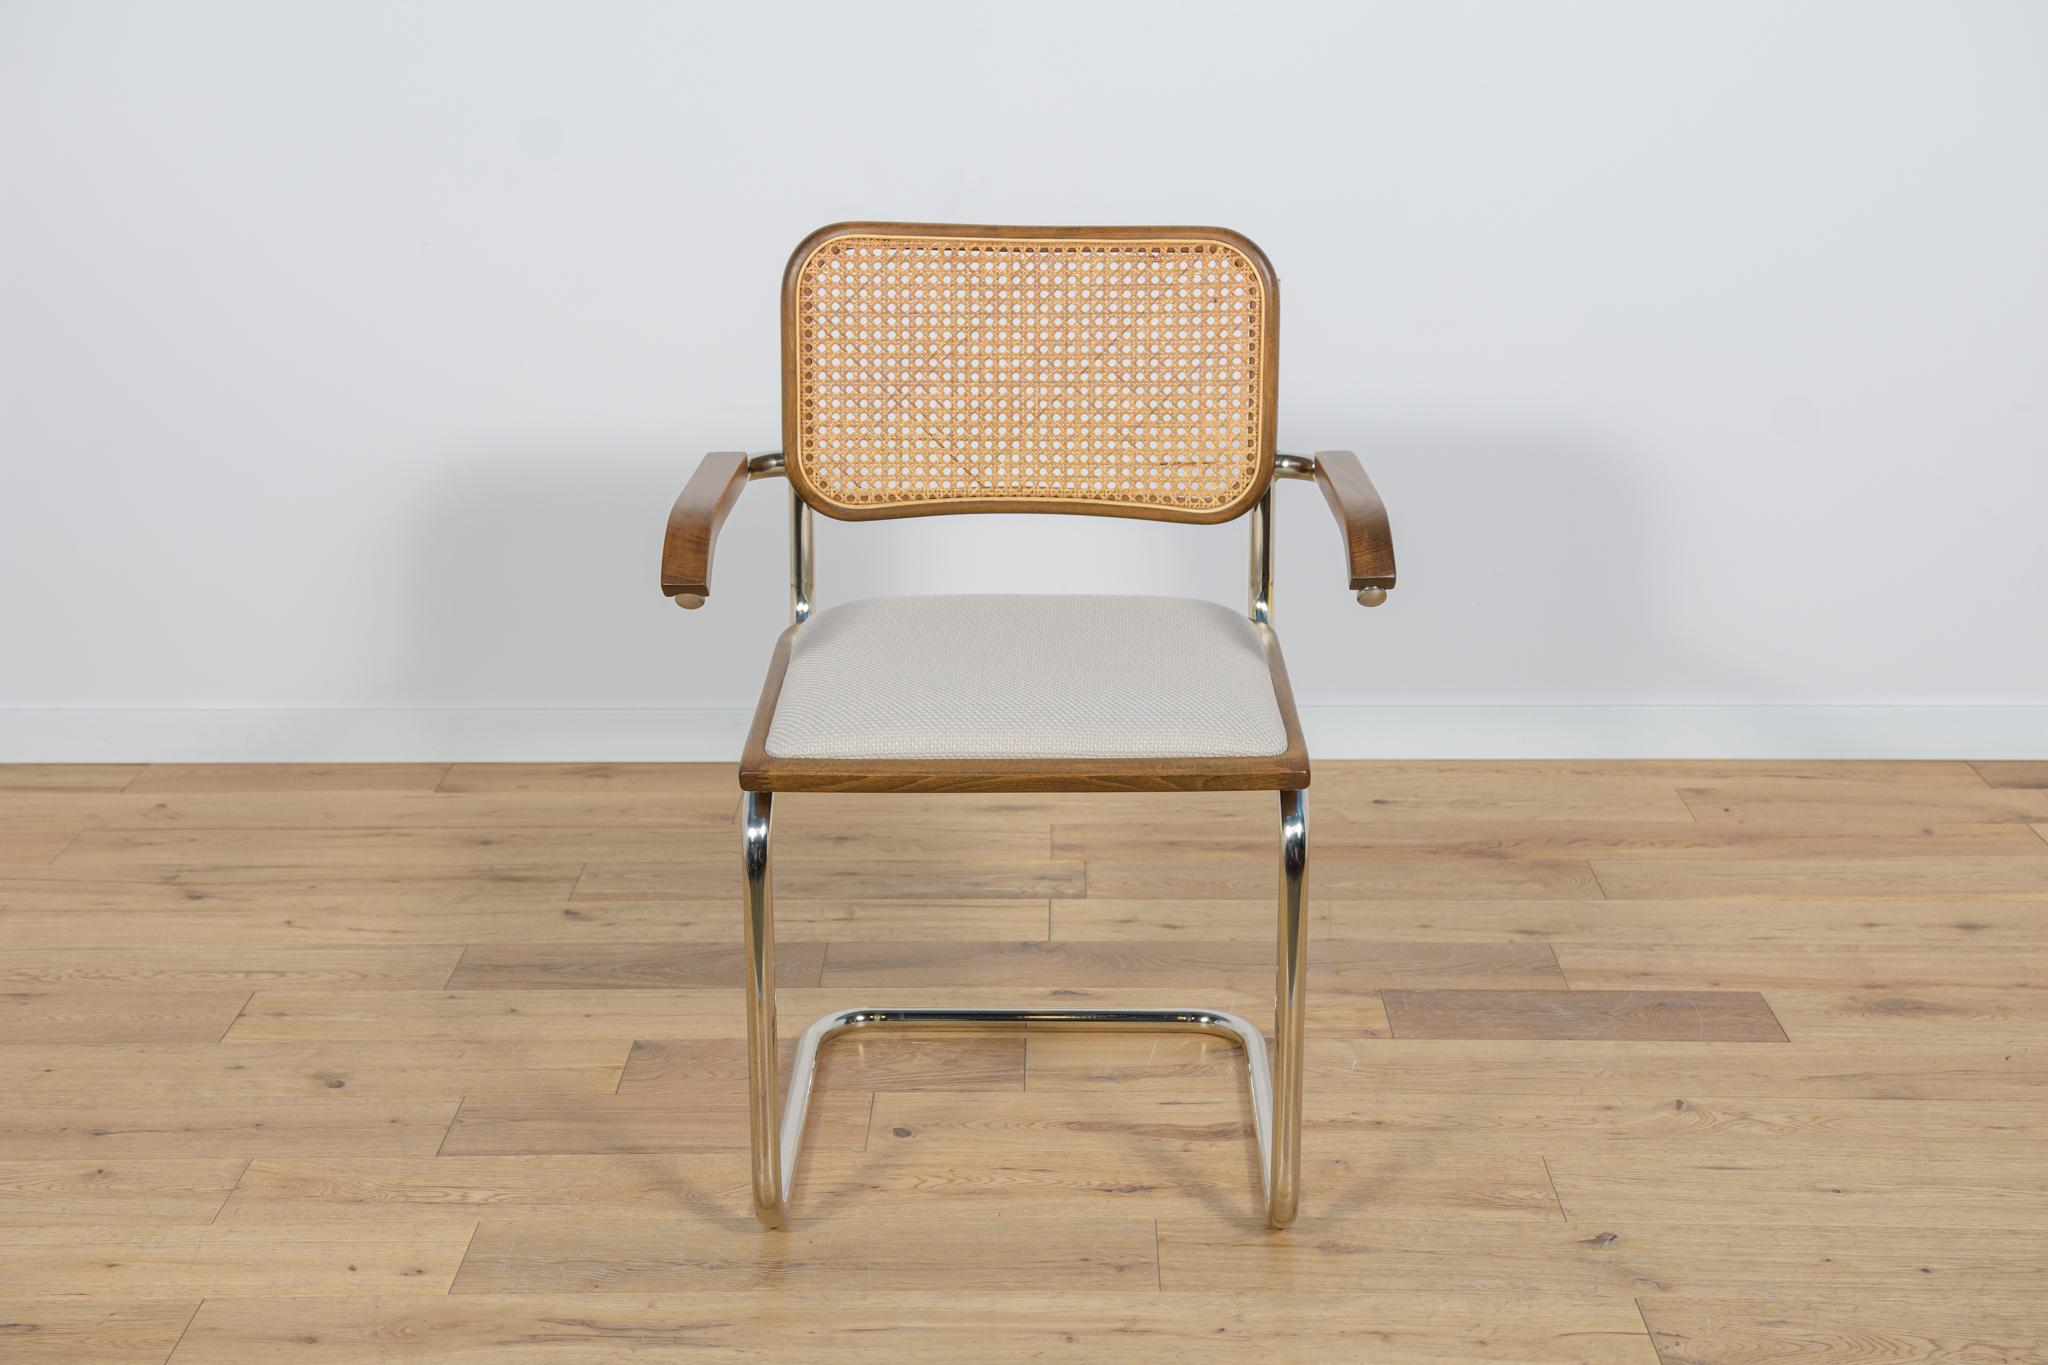 Cesca-type armchair, modeled on Marcel Breuer's design from 1928. Produced in the 1980s. The chrome-plated frame is in very good original condition, has been cleaned and polished. The joinery has been professionally renovated, the beech wood has